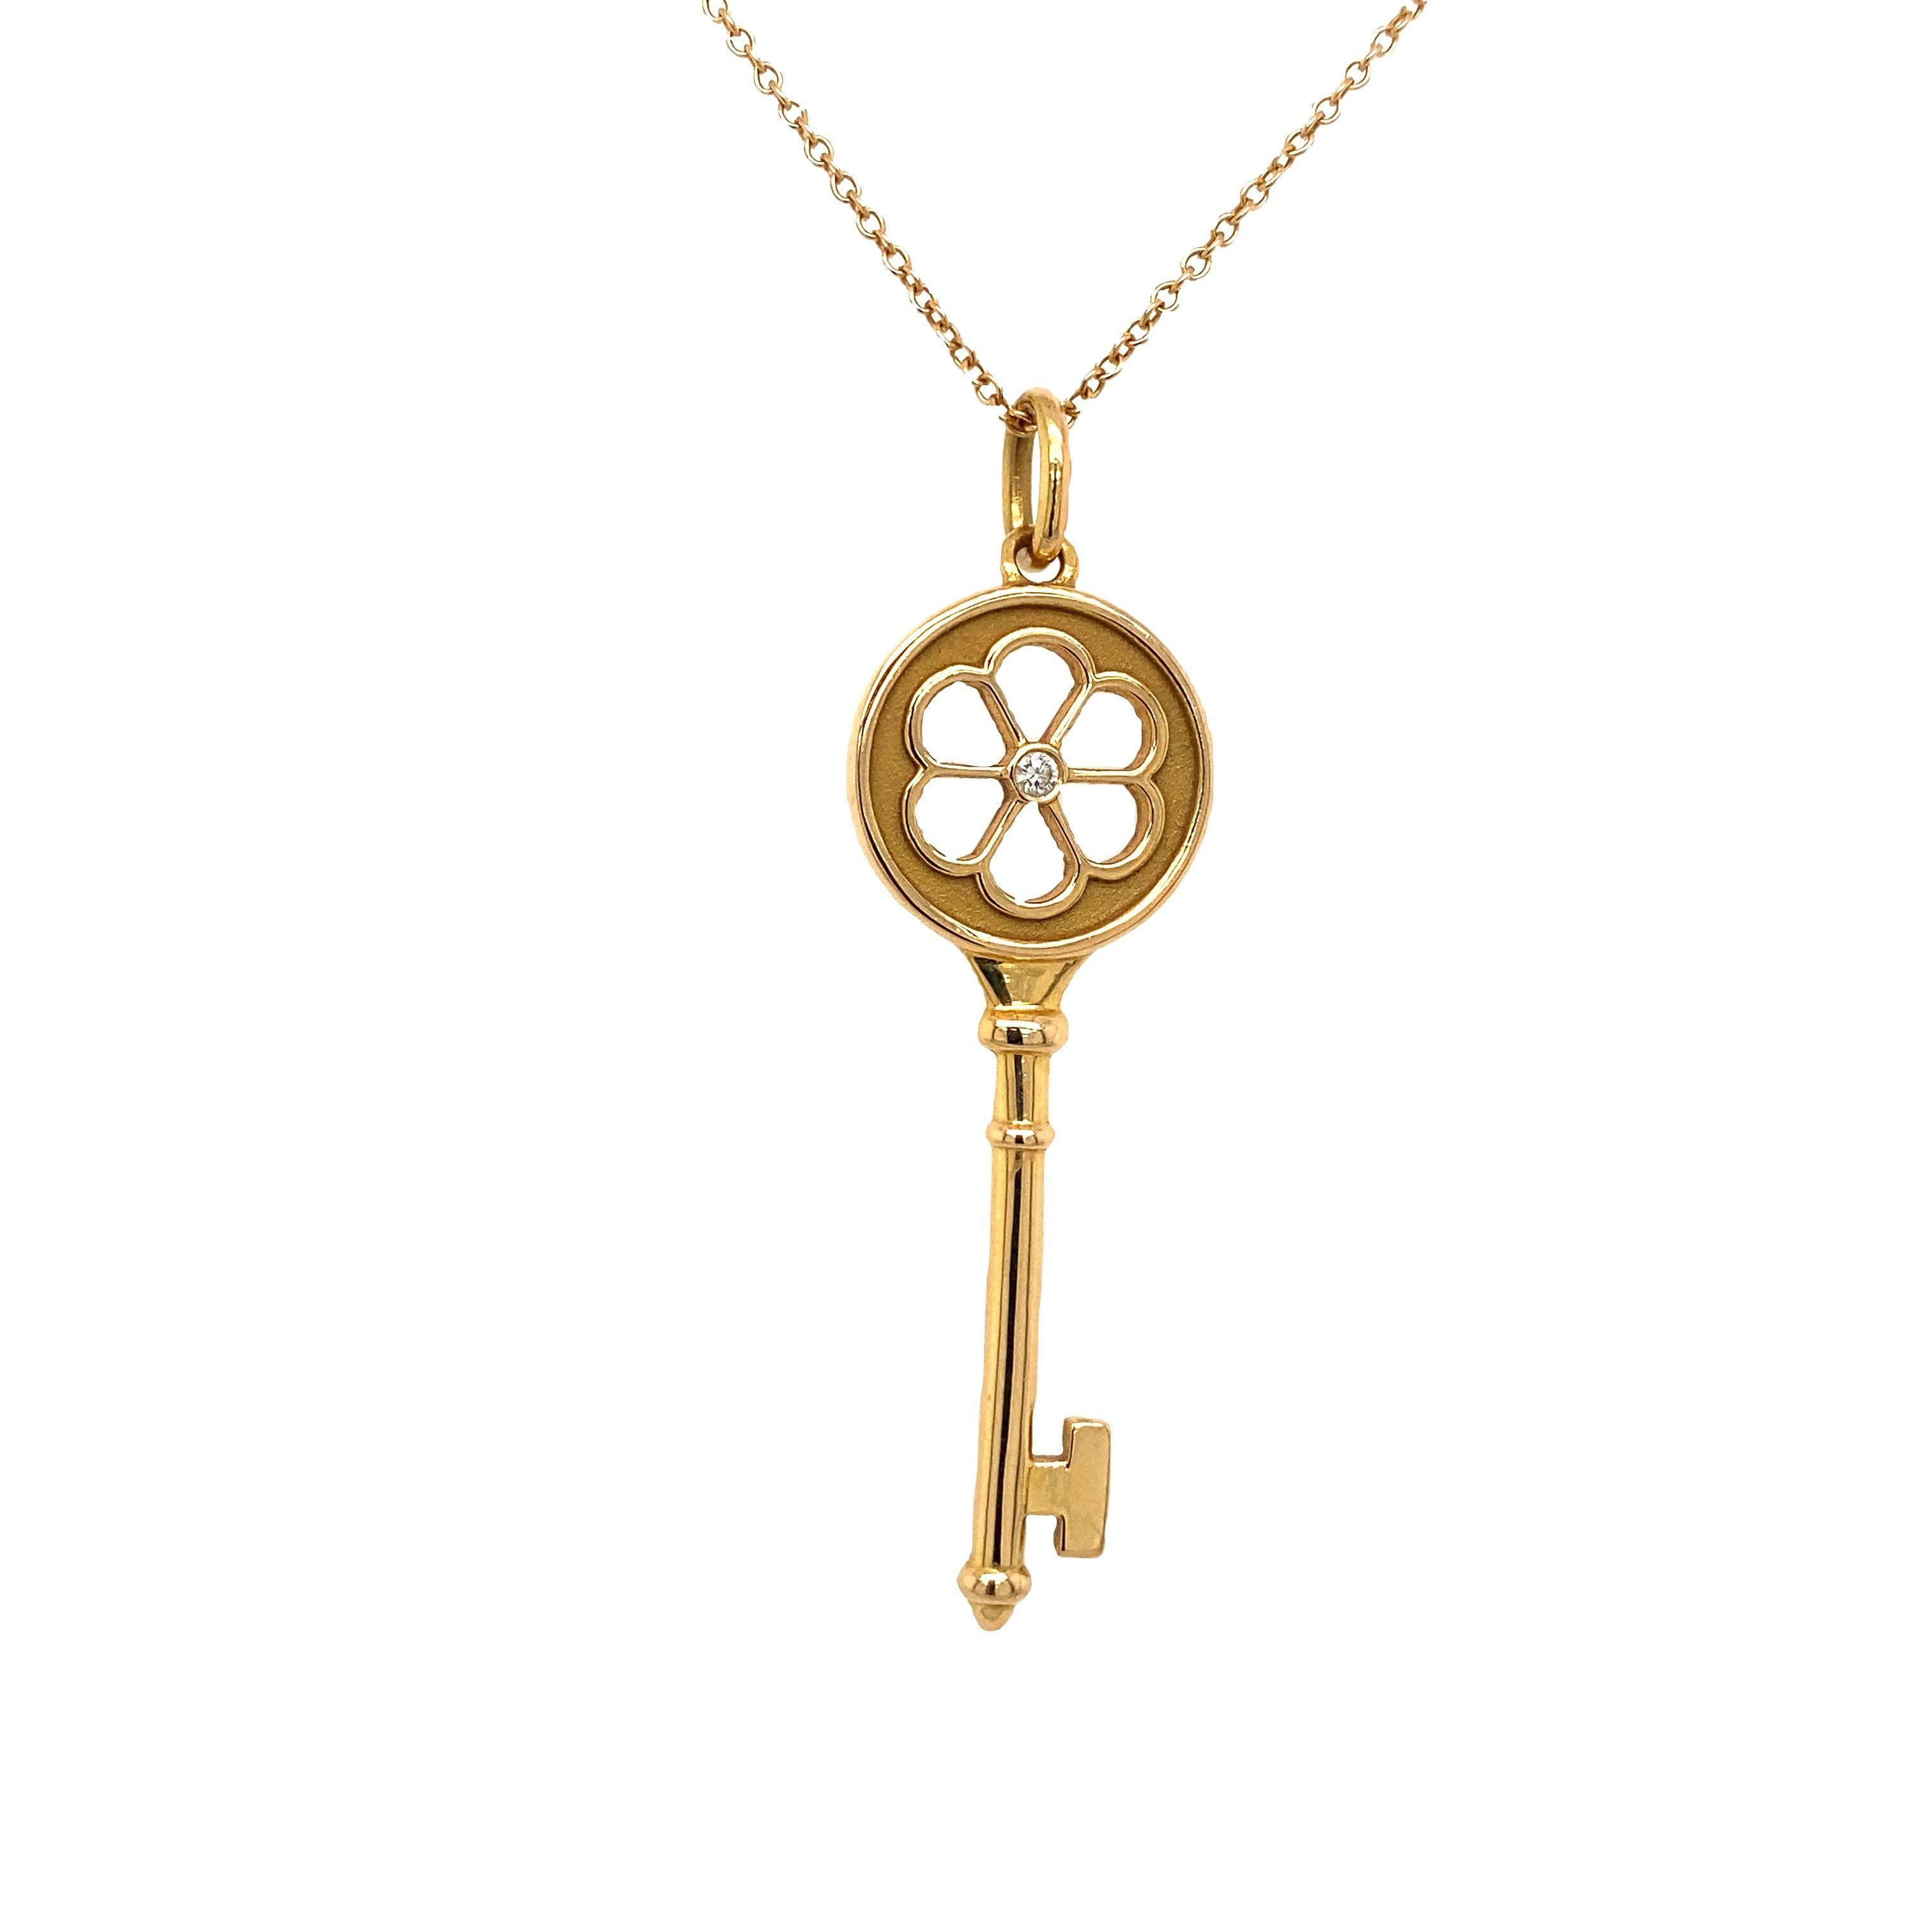 This beautiful diamond blossom flower key pendant is suspended from a 16